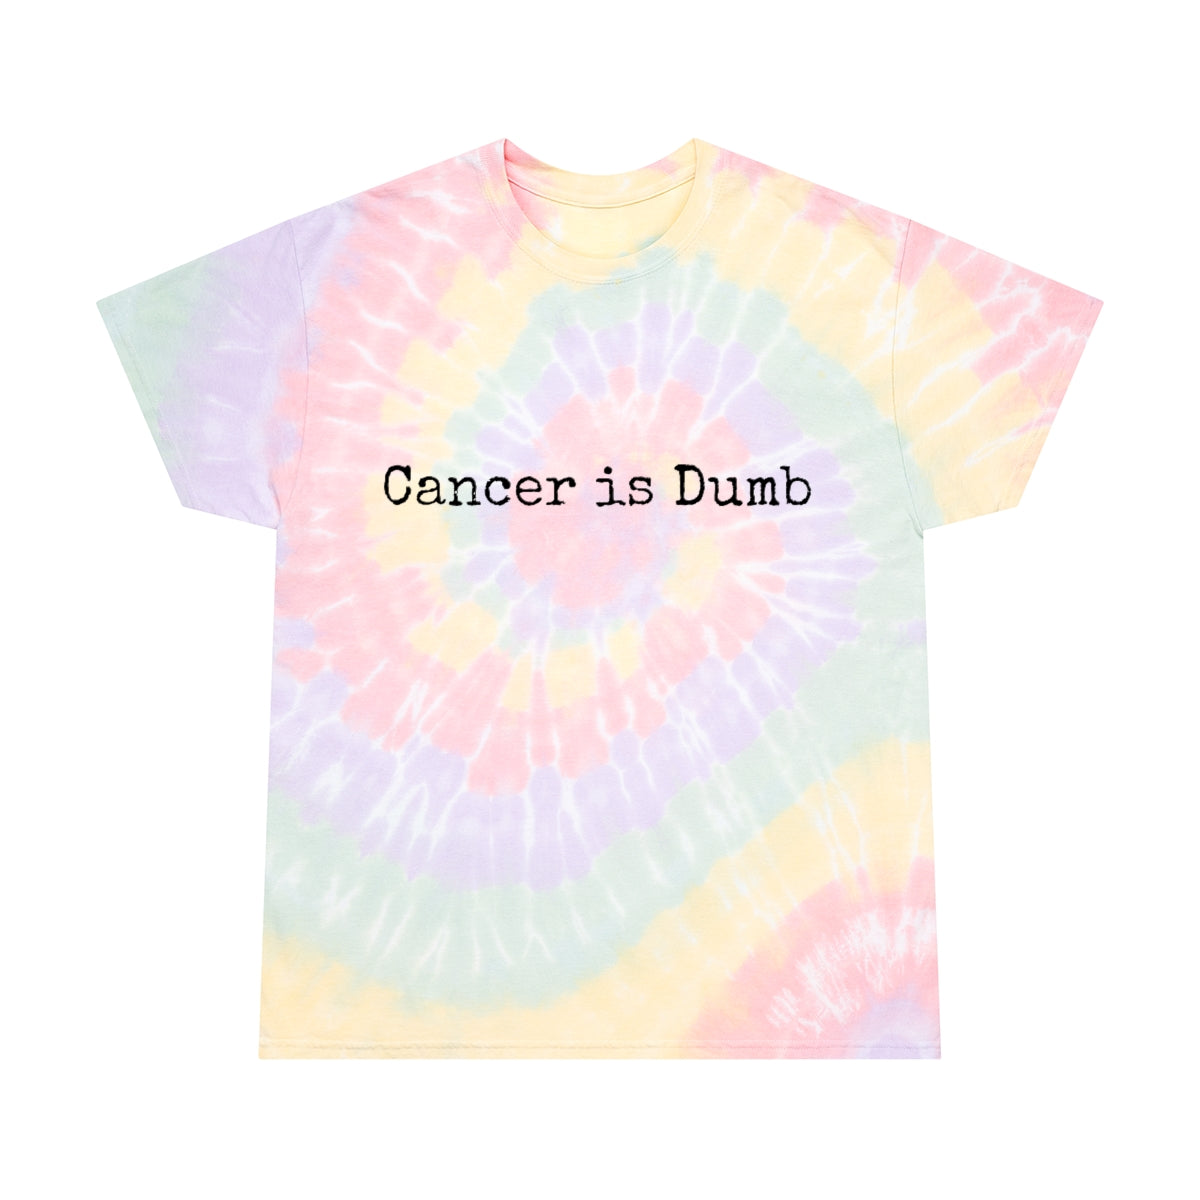 Tie-Dye Tee, Spiral T Shirt tshirt Anti Cancer Cancer is Dumb Survivor Support Humorous Funny